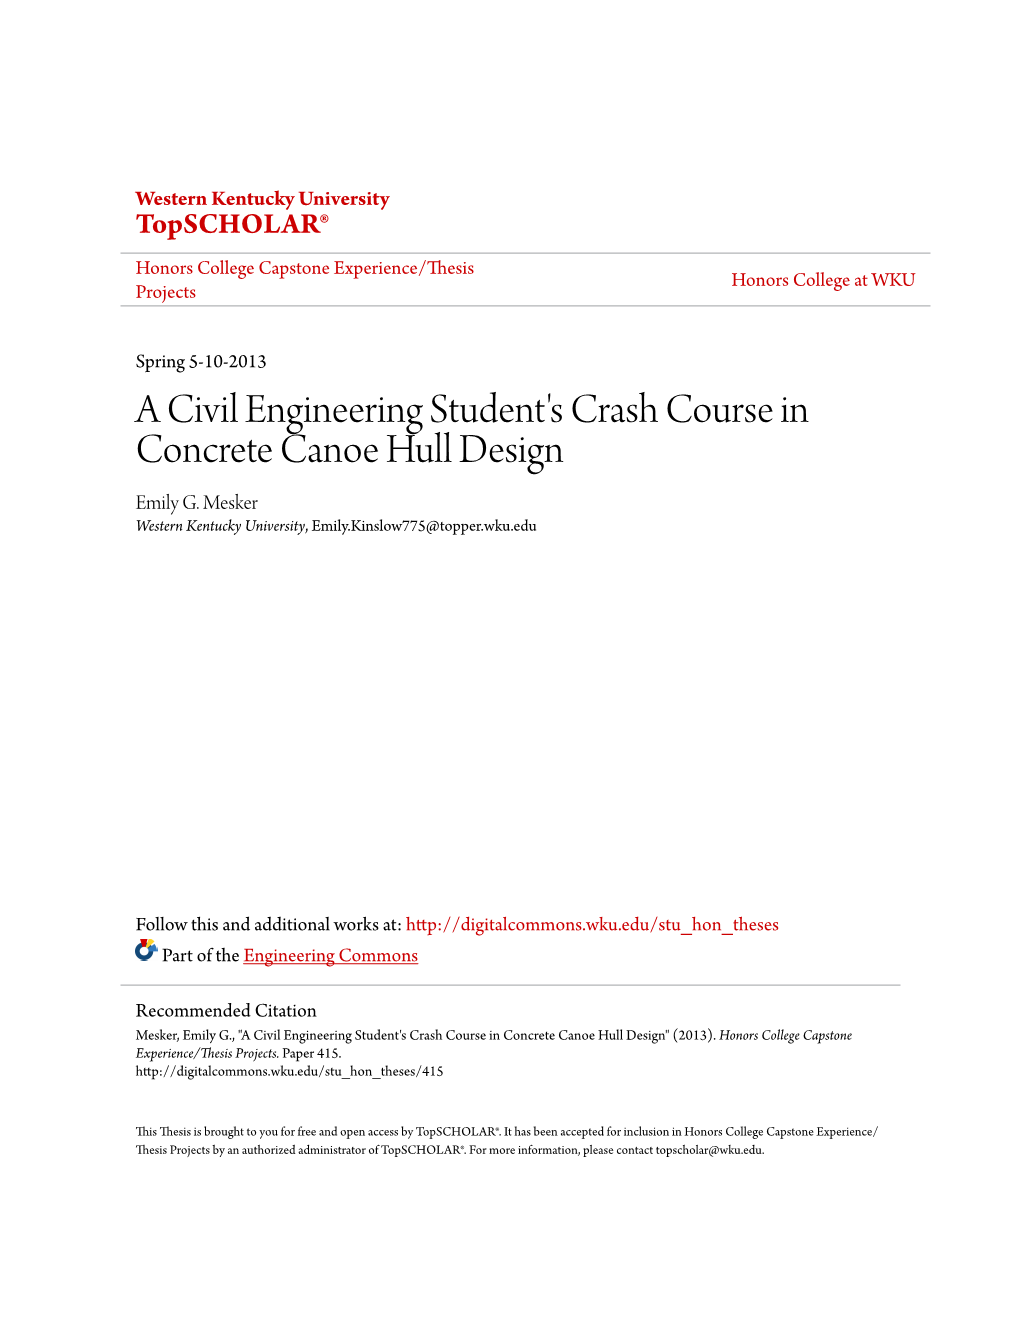 A Civil Engineering Student's Crash Course in Concrete Canoe Hull Design Emily G